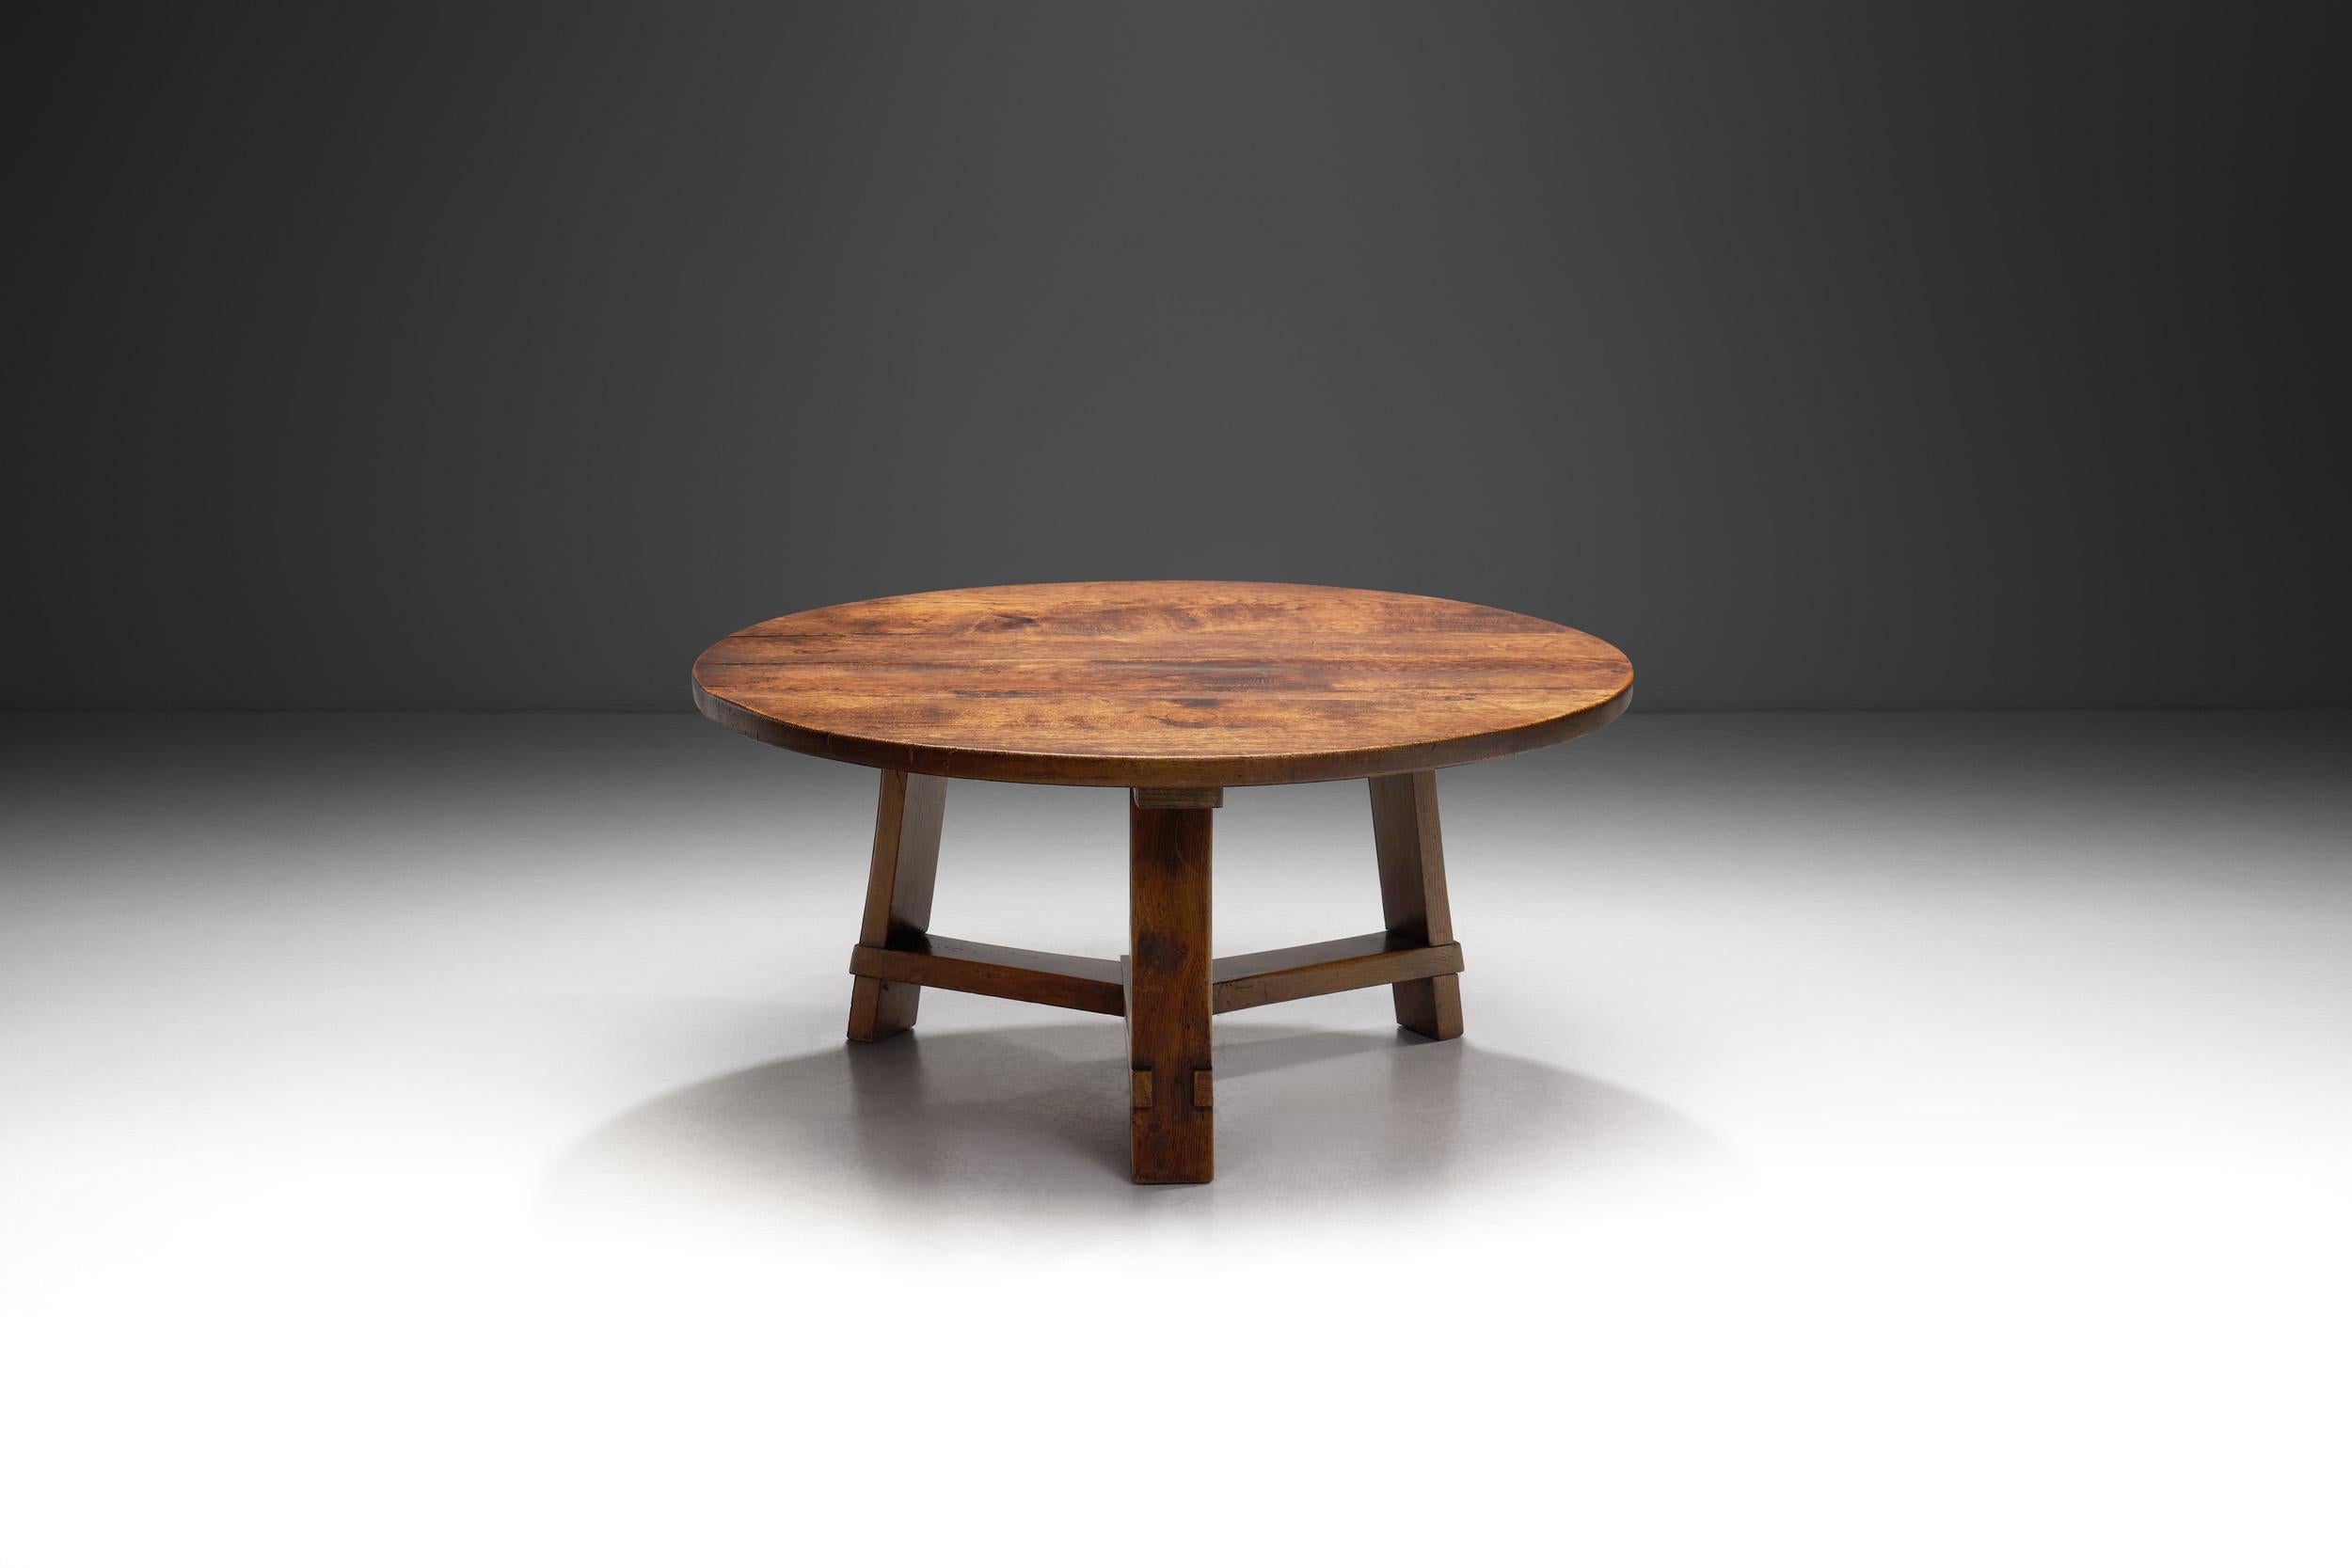 The 1960s marked an important era in Dutch furniture design, characterized by a fusion of traditional craftsmanship and avant-garde concepts. One exceptional exemplar of this period is this Brutalist wooden coffee table. This piece epitomizes the